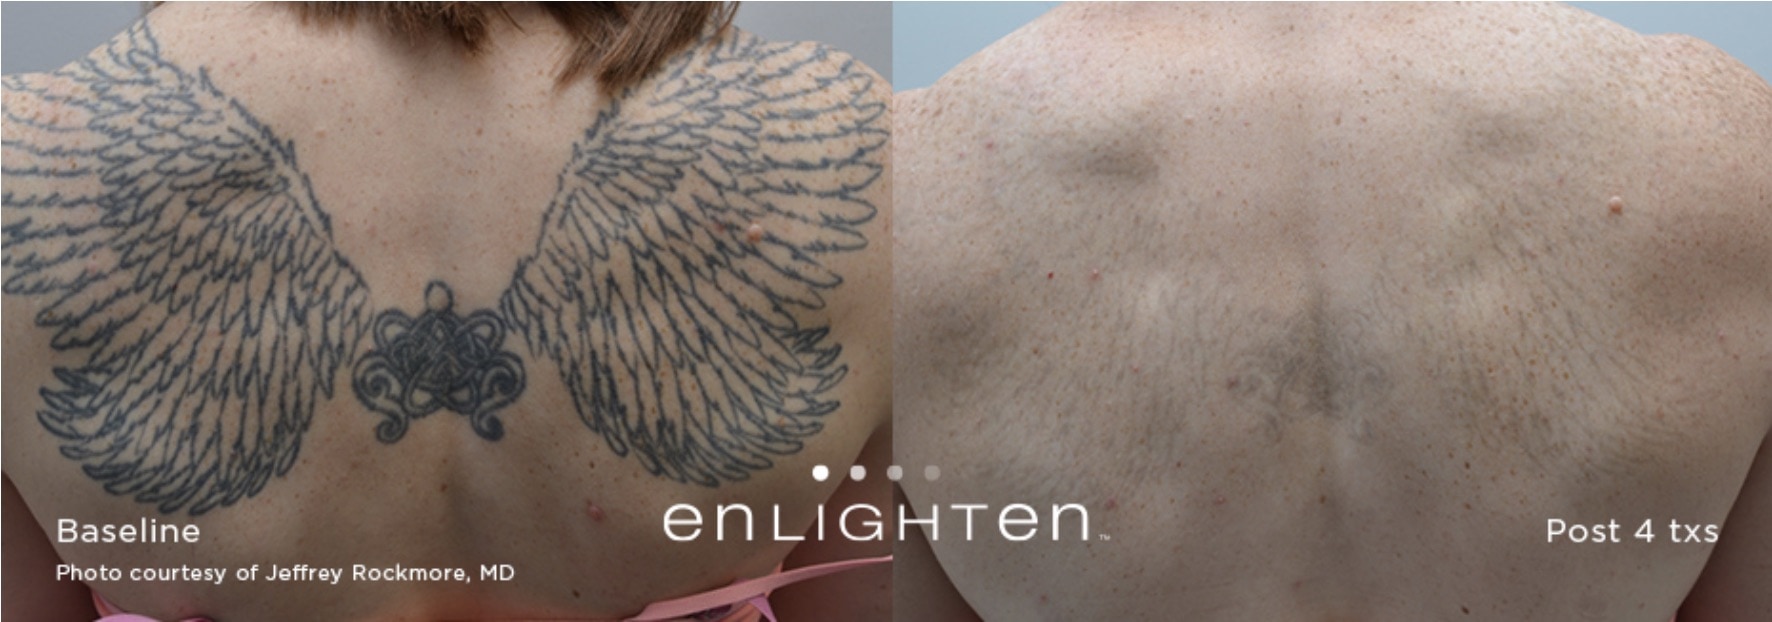 Regretting That Tattoo? Learn About Laser Tattoo Removal: Skin Deep Laser  Medspa: Medical Spa